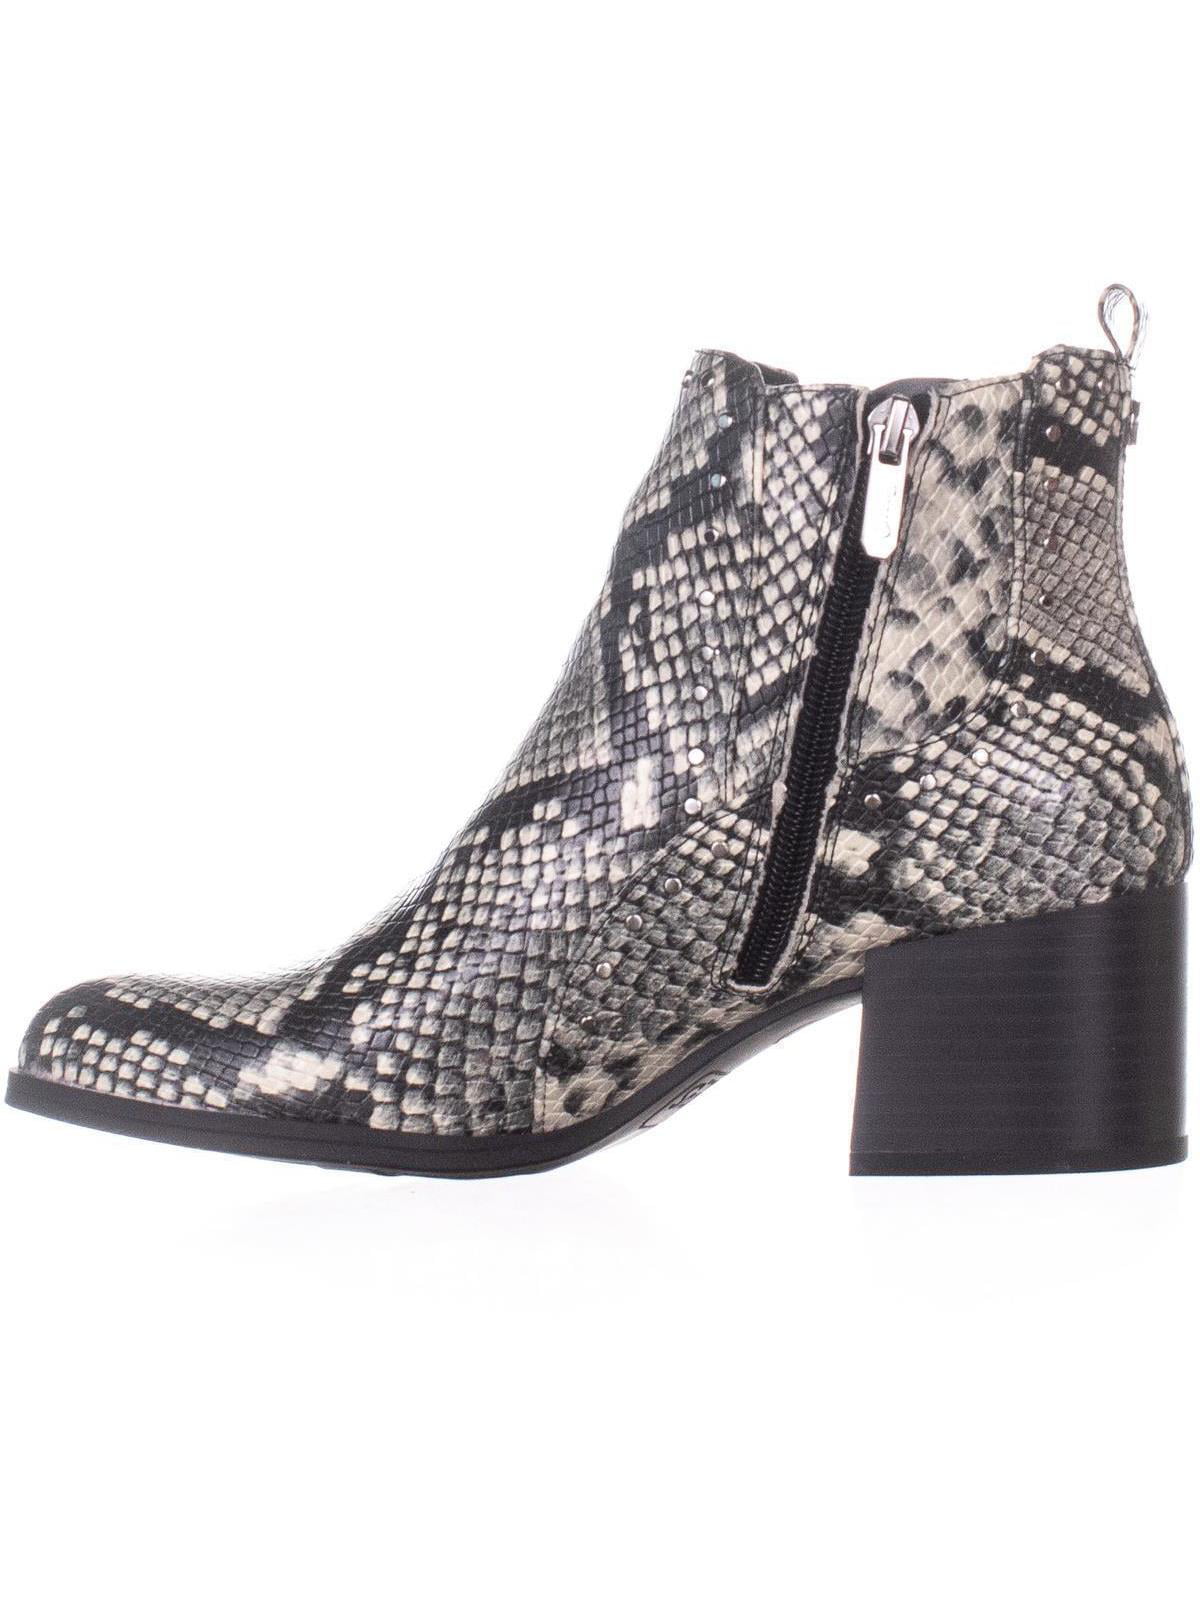 Circus by Sam Edelman Jenna Ankle Boots 